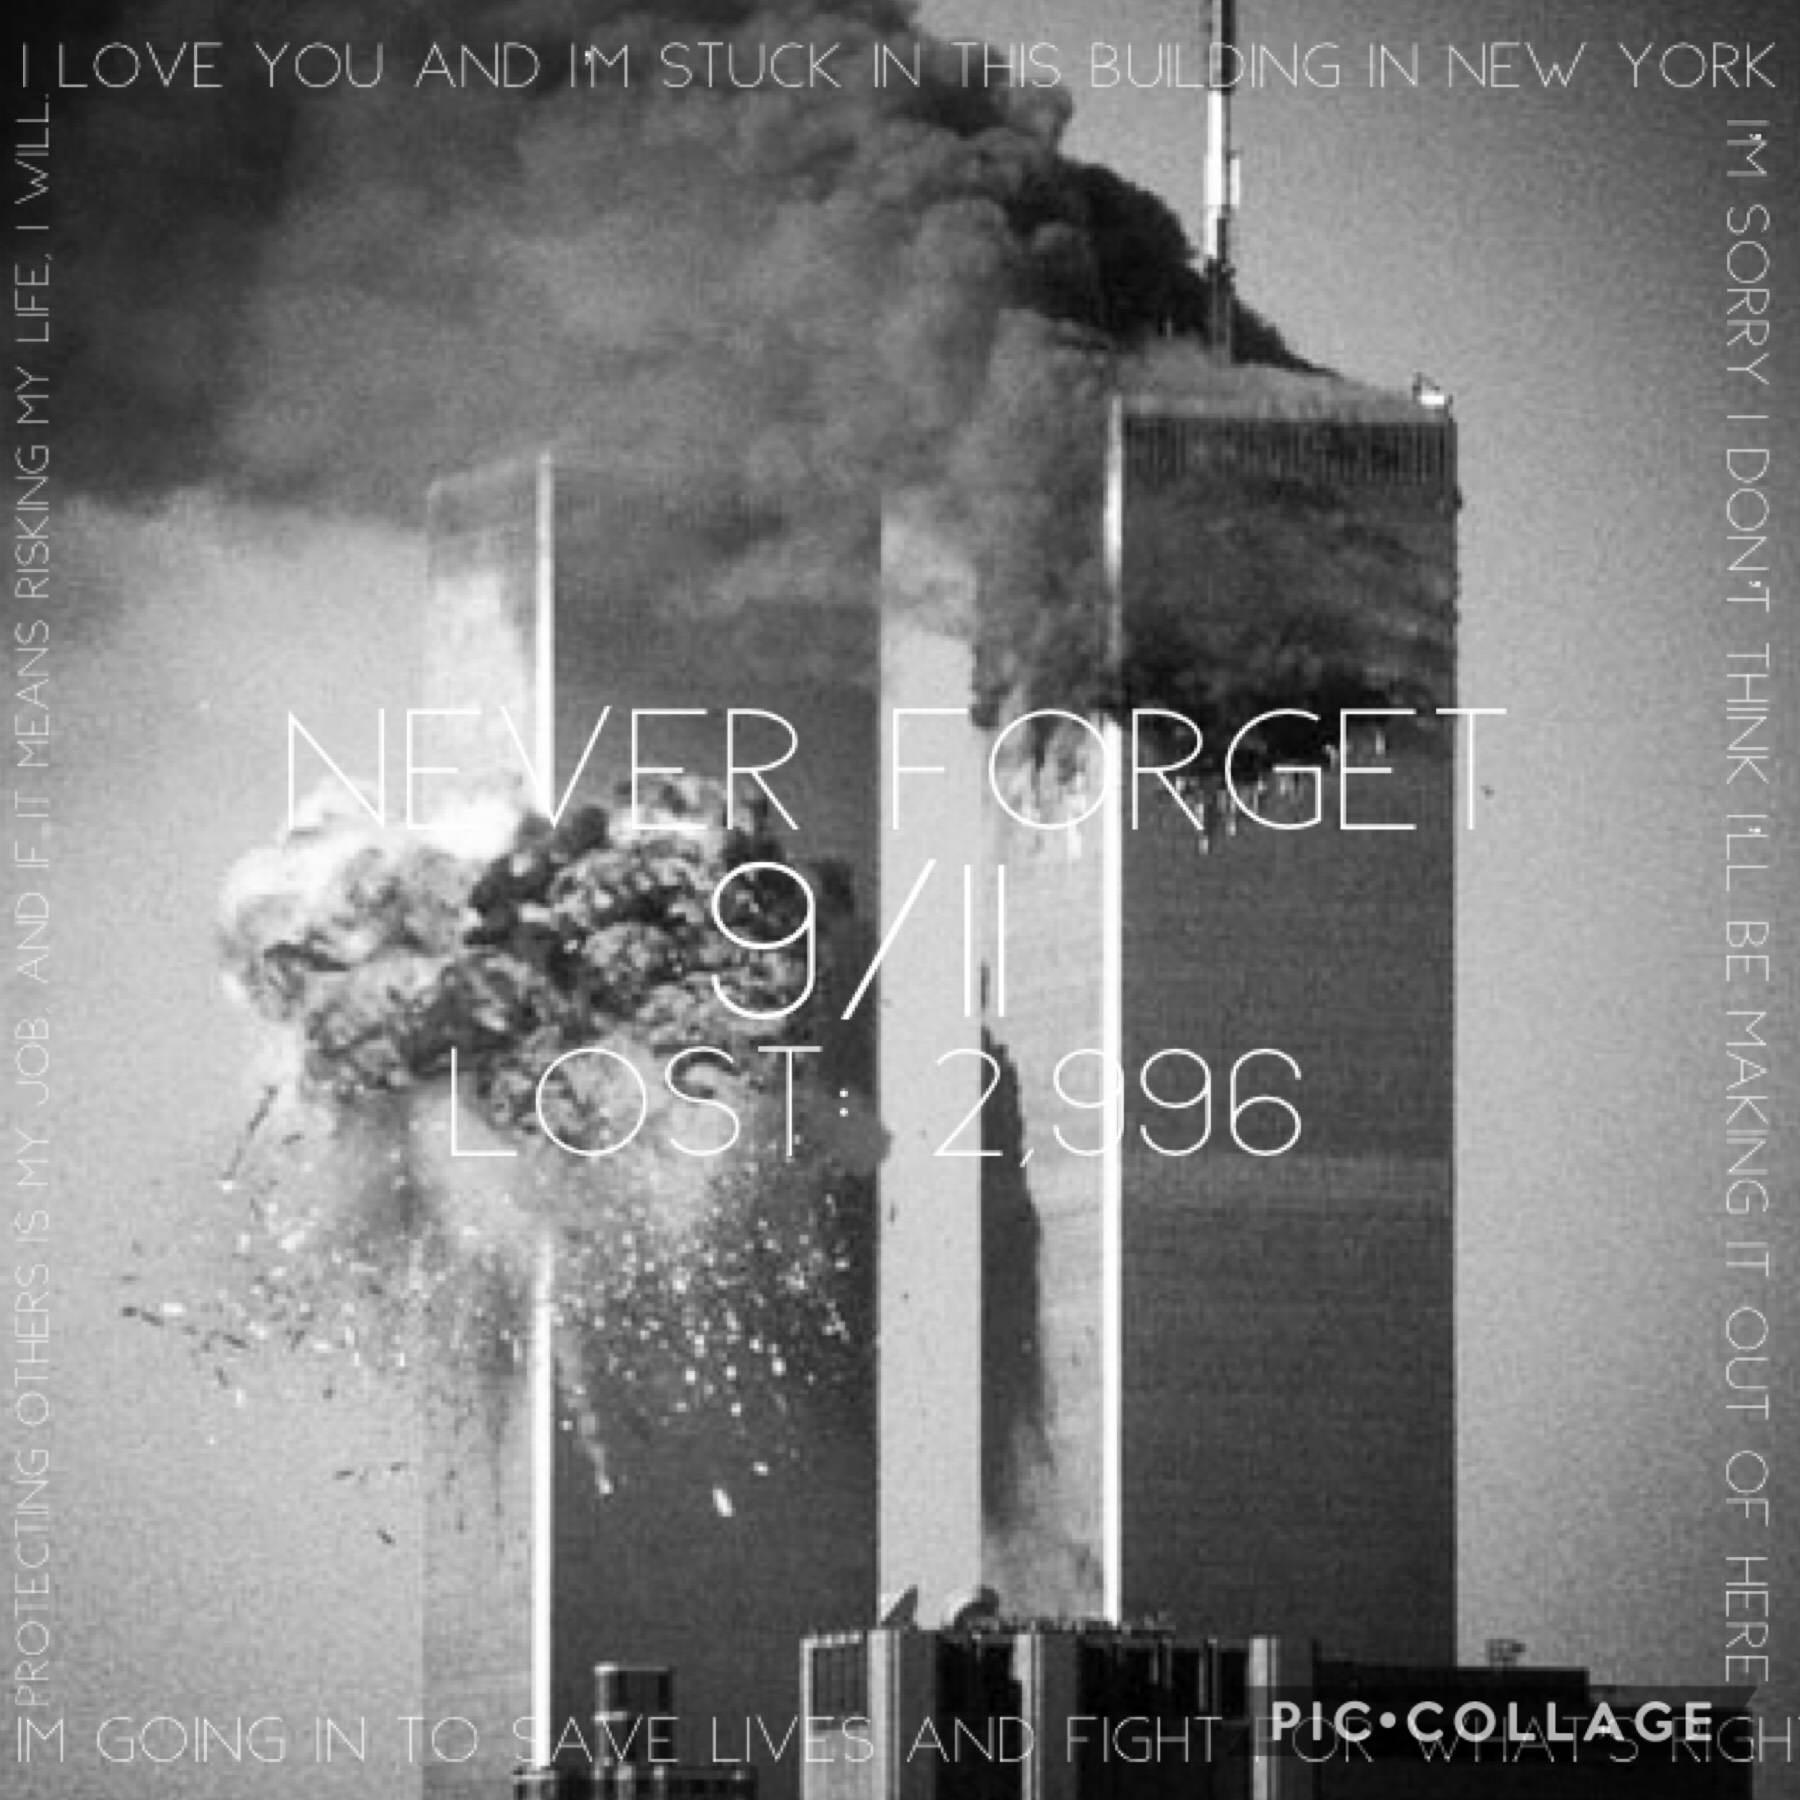 💙click 💙
9/11 was a scary, unfortunate day but we need to remember it, it gives me a hatrèd towards terroristš. I decided to take down the contest because I only had two entries. That’s really upsetting to me though, because 2,000 something people died an